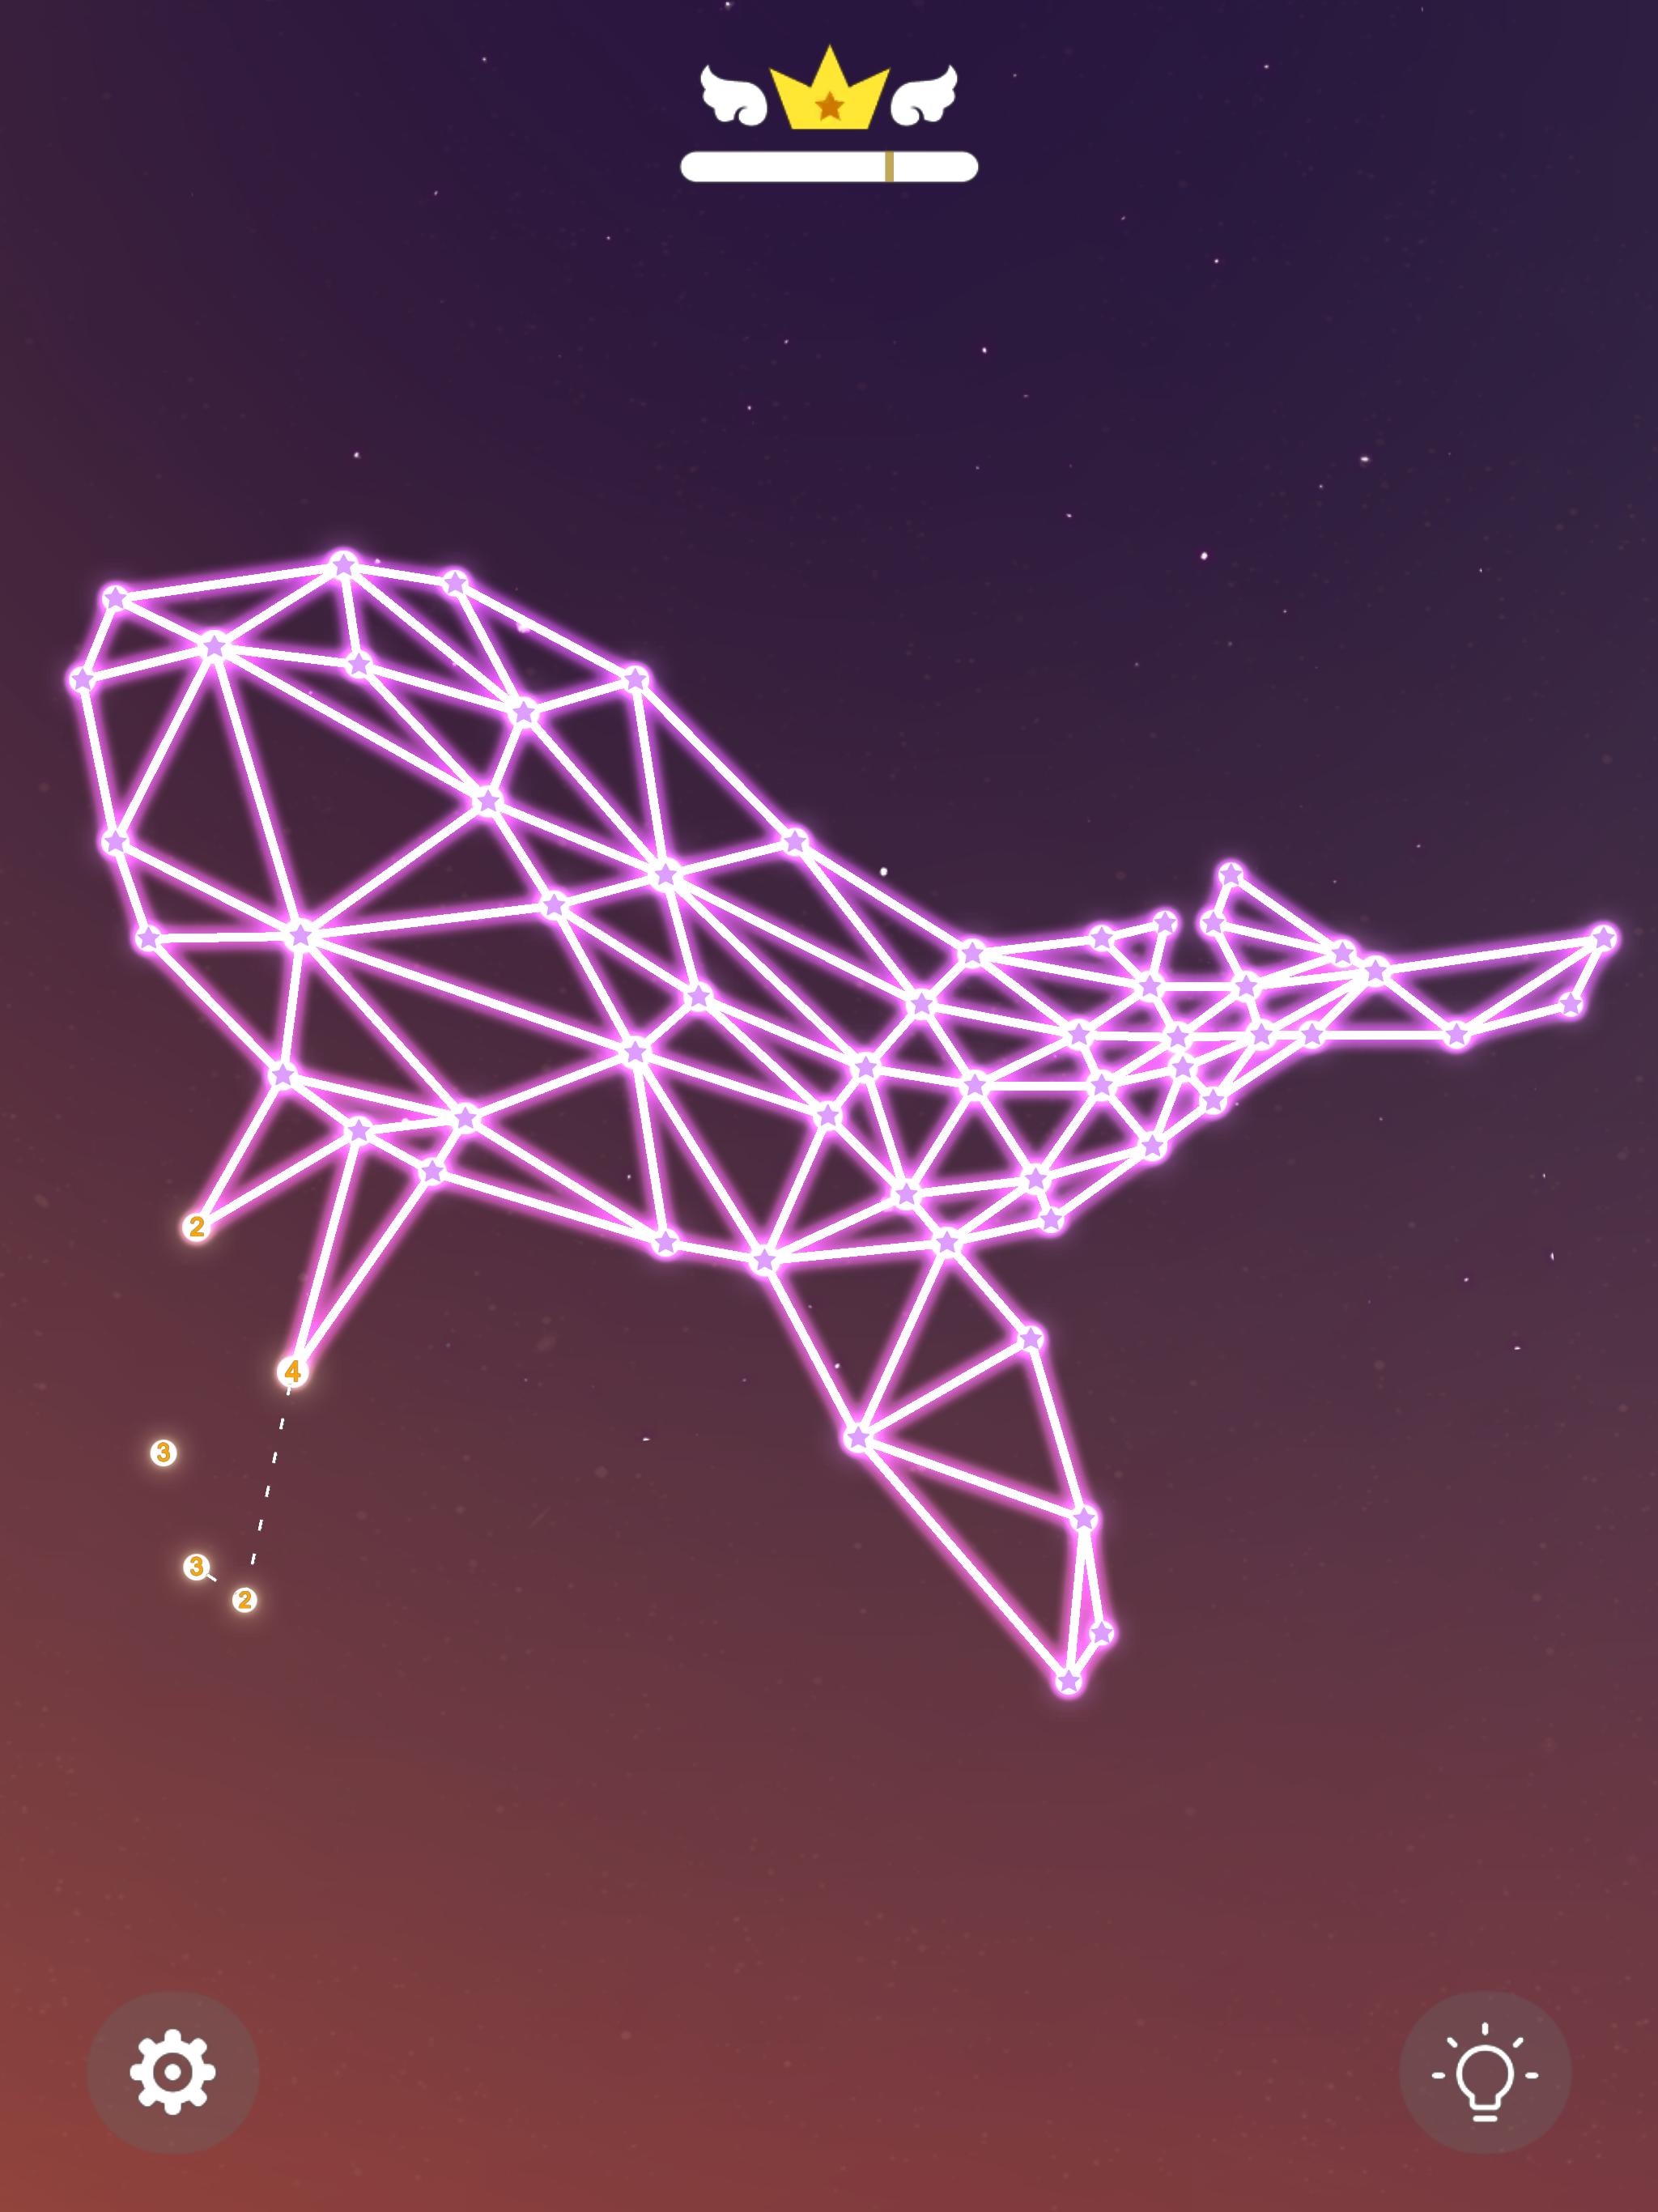 Linepoly Puzzle - Constellation games 1.2.3 Screenshot 8